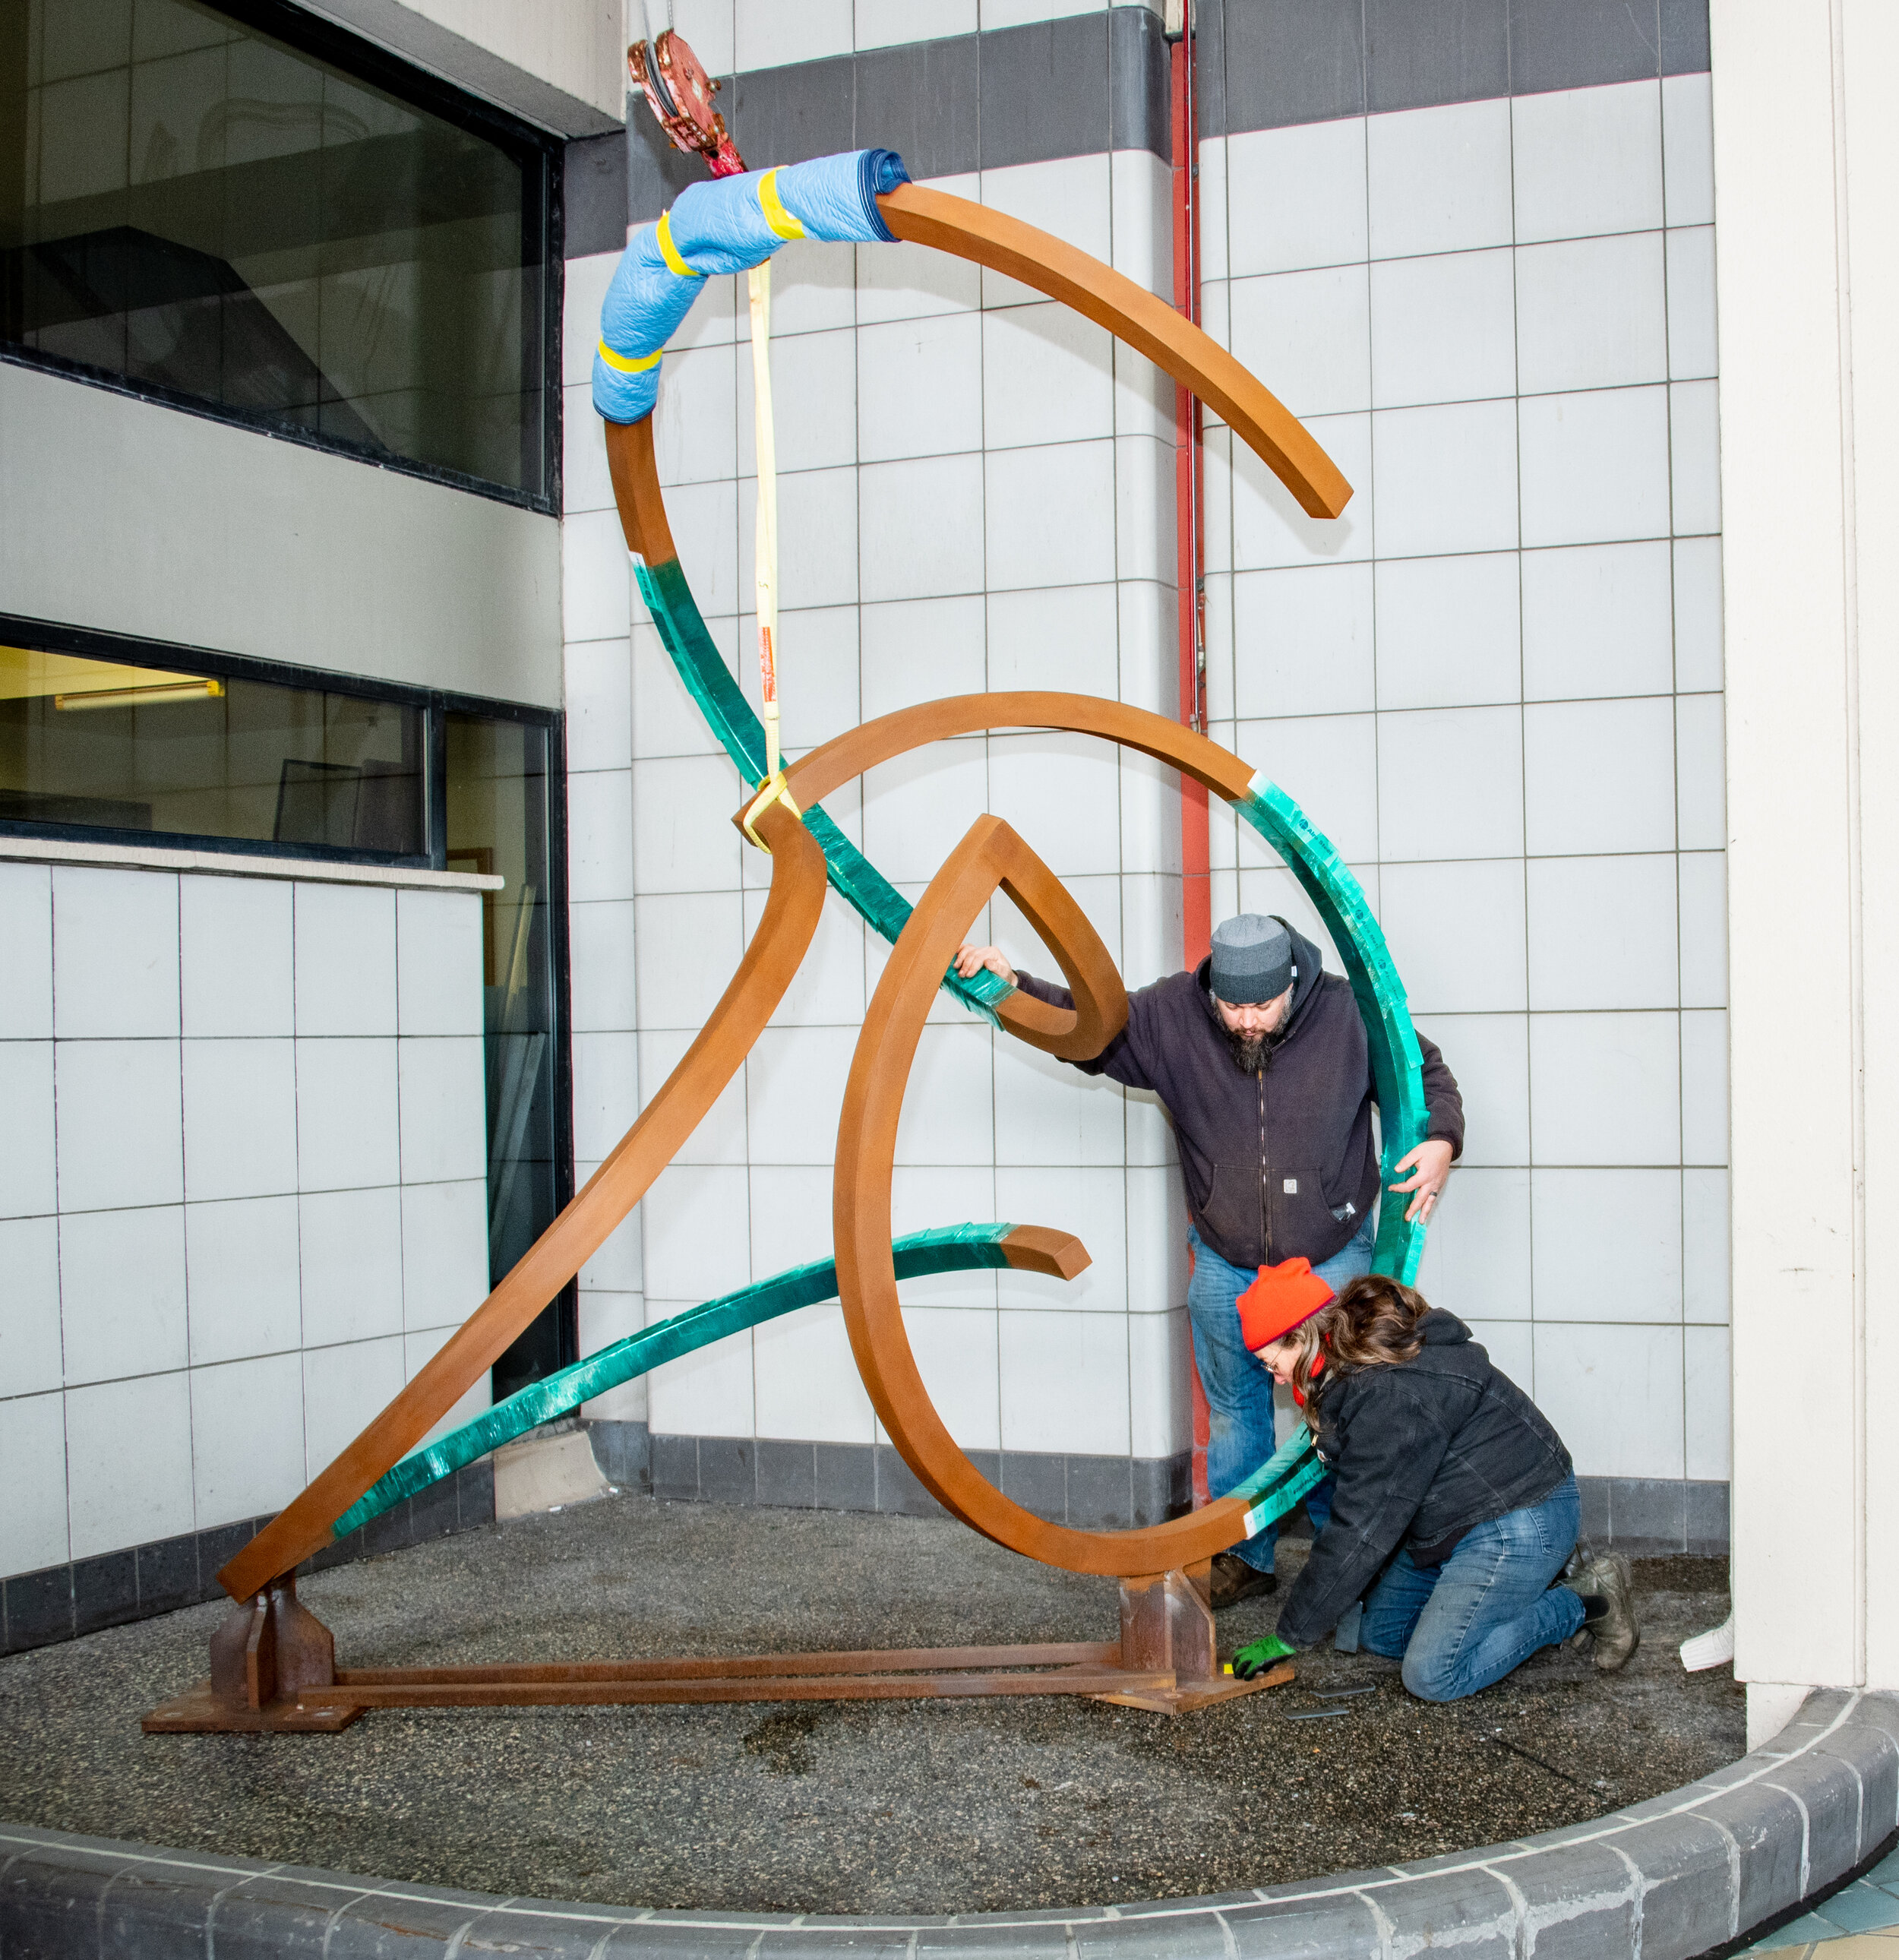  Project Management for the creation and installation of an exterior sculpture walk at Pittsburgh International Airport. Shown here, installation in progress by artist Dee Briggs.  Photo by Beth Hollerich  